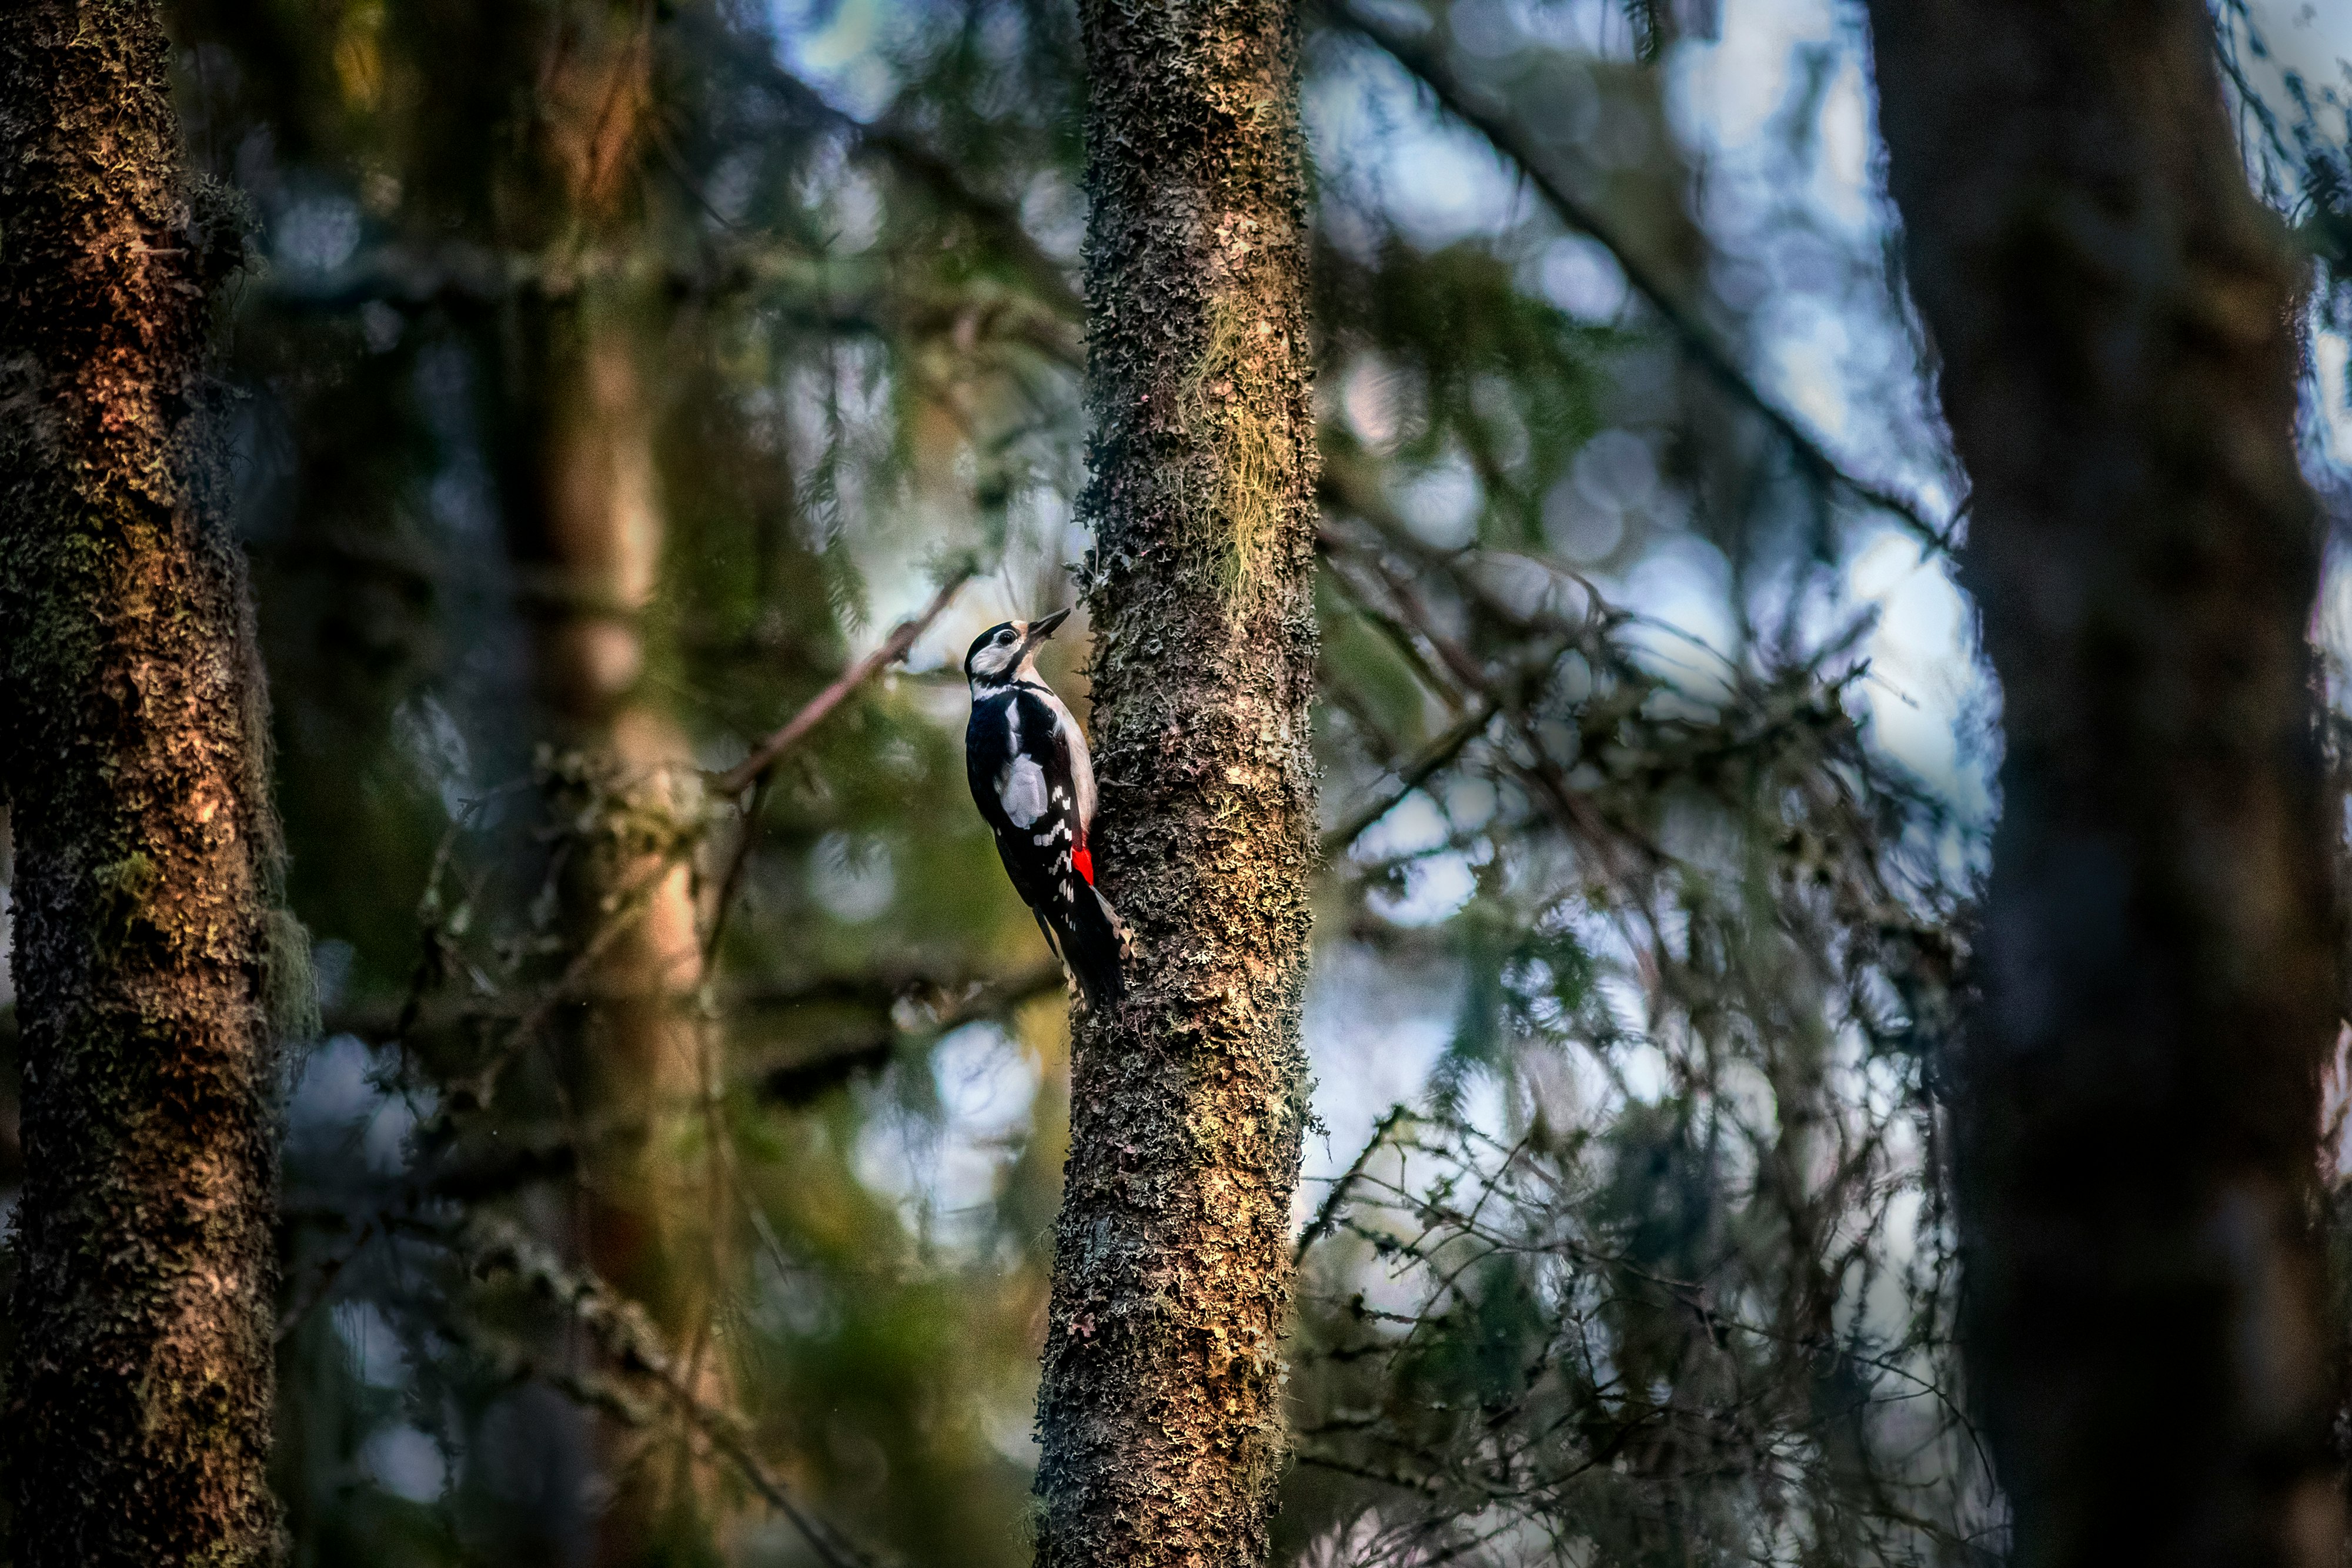 black and white bird on brown tree branch during daytime